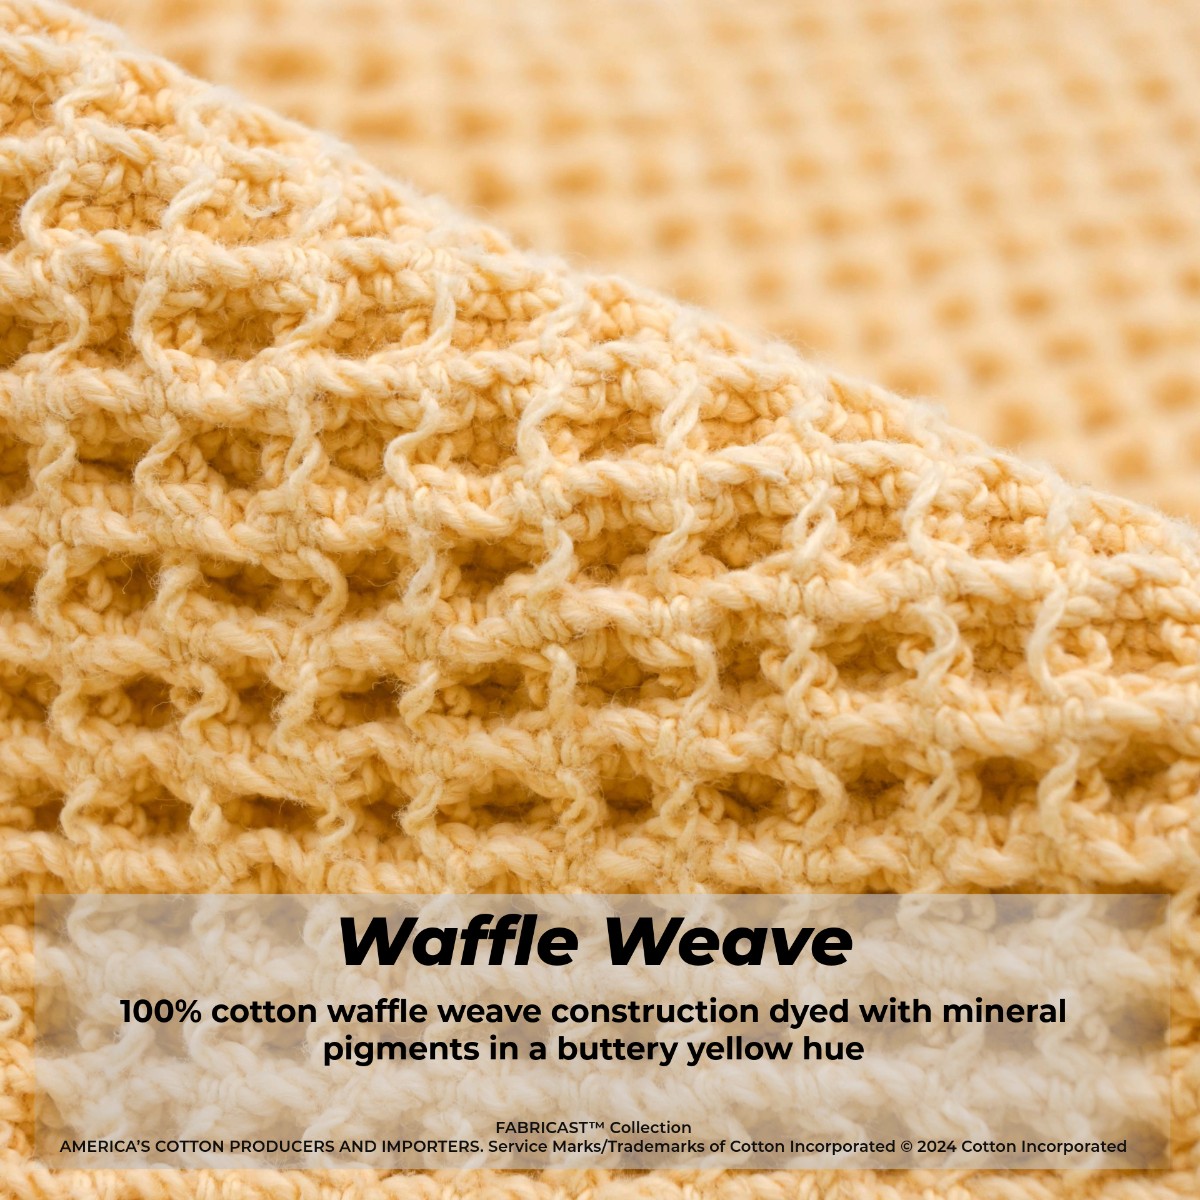 This chunky 100% #cotton waffle weave construction was dyed with mineral pigments in a buttery yellow hue. These naturally sourced pigments offer very good light and wash fastness properties. #FabricFriday @cotton_works cottonworks.com/en/fabricast/7…